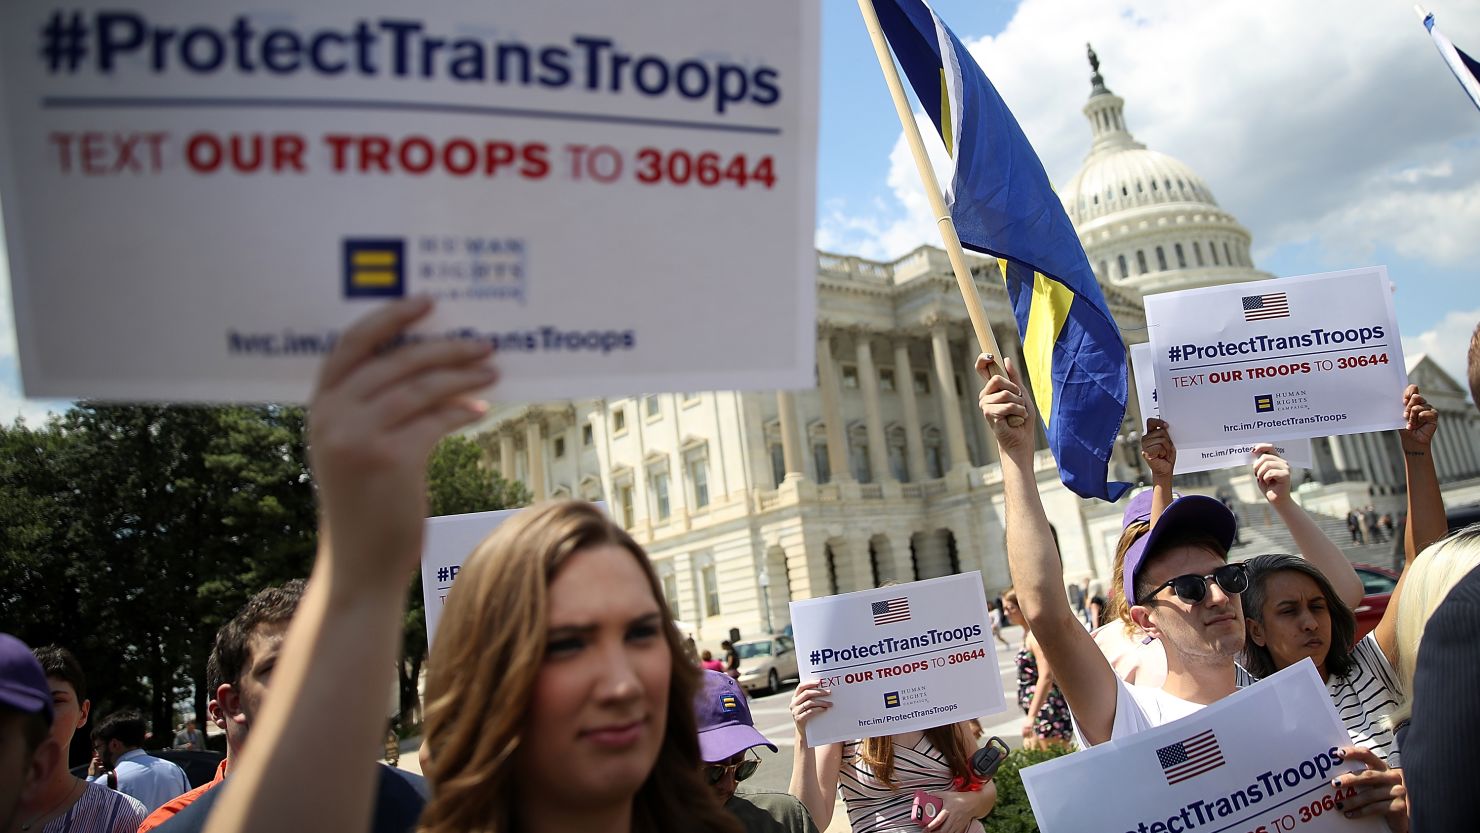 Gay rights supporters condemn a ban on transgender service members during a protest at the US Capitol on July 26, 2017 in Washington, DC.  